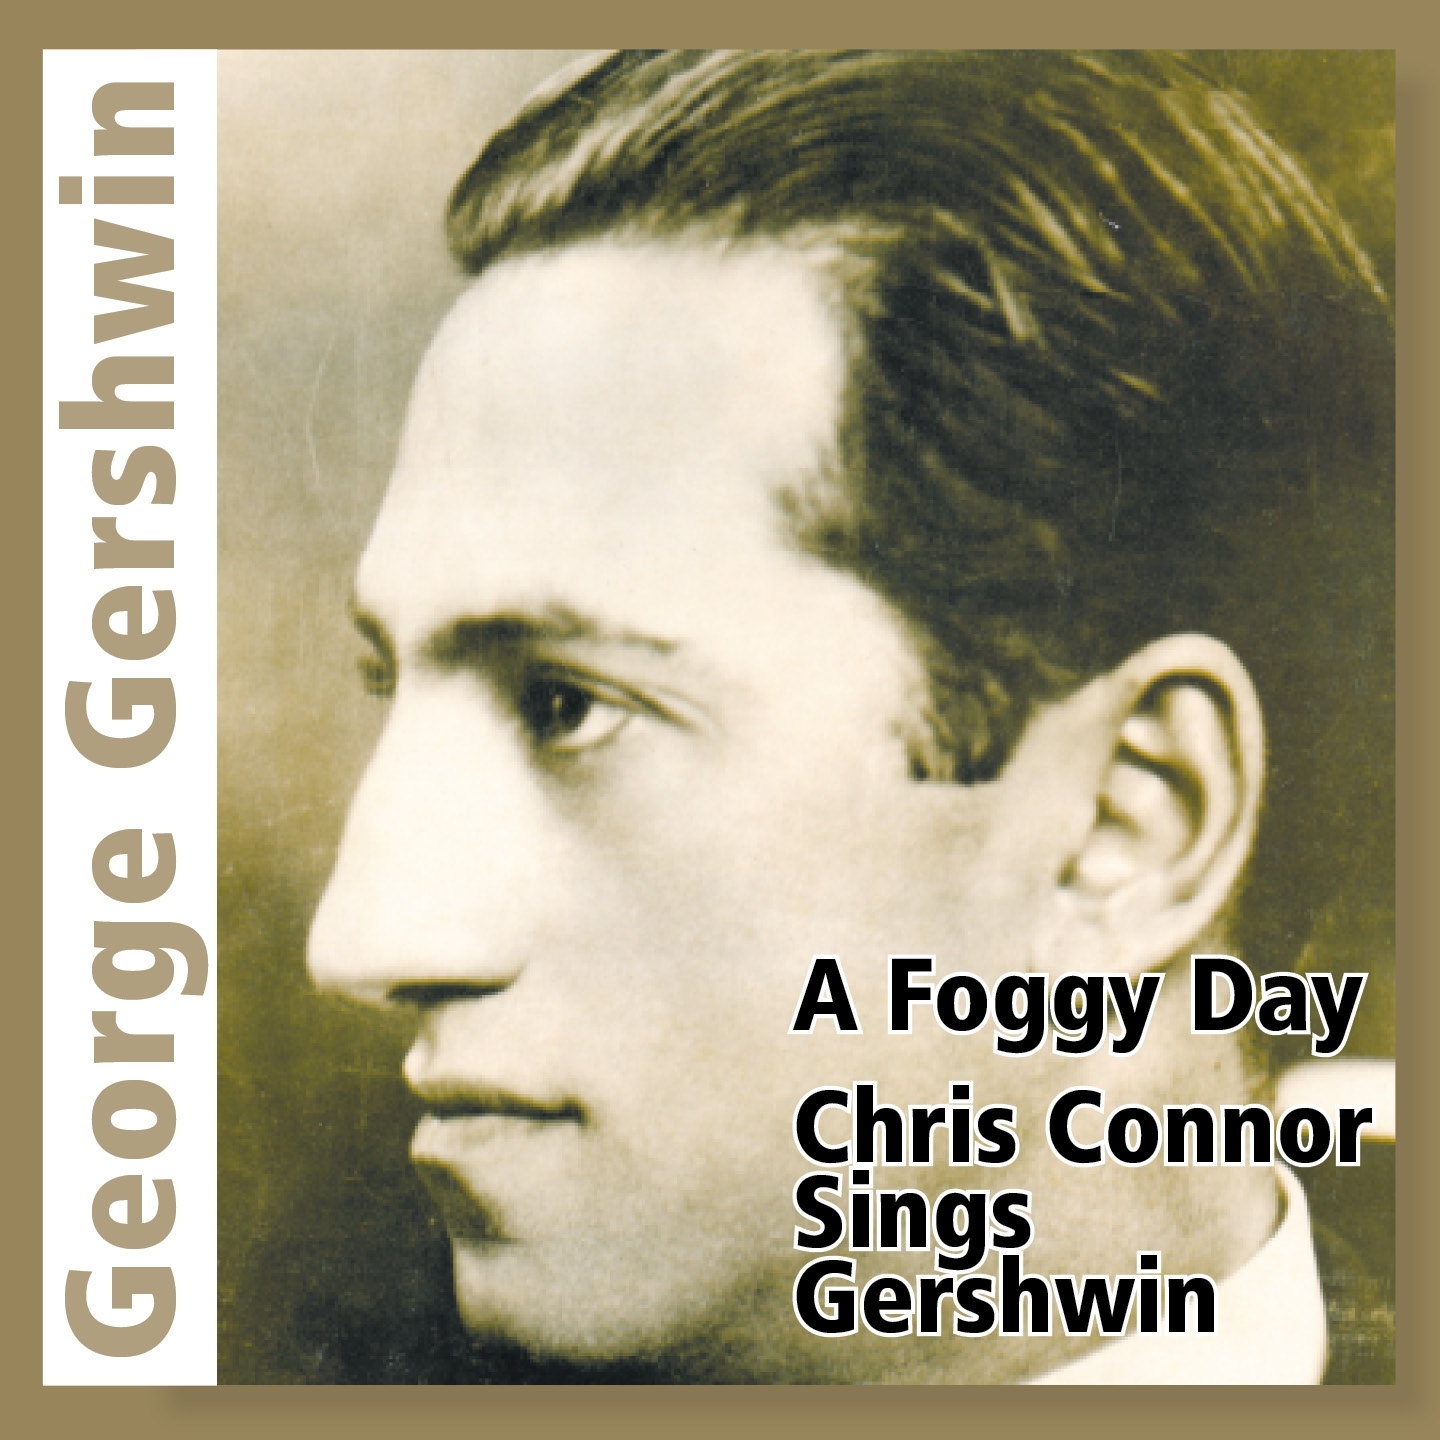 A Foggy Day (Chris Connor Sings Gershwin)